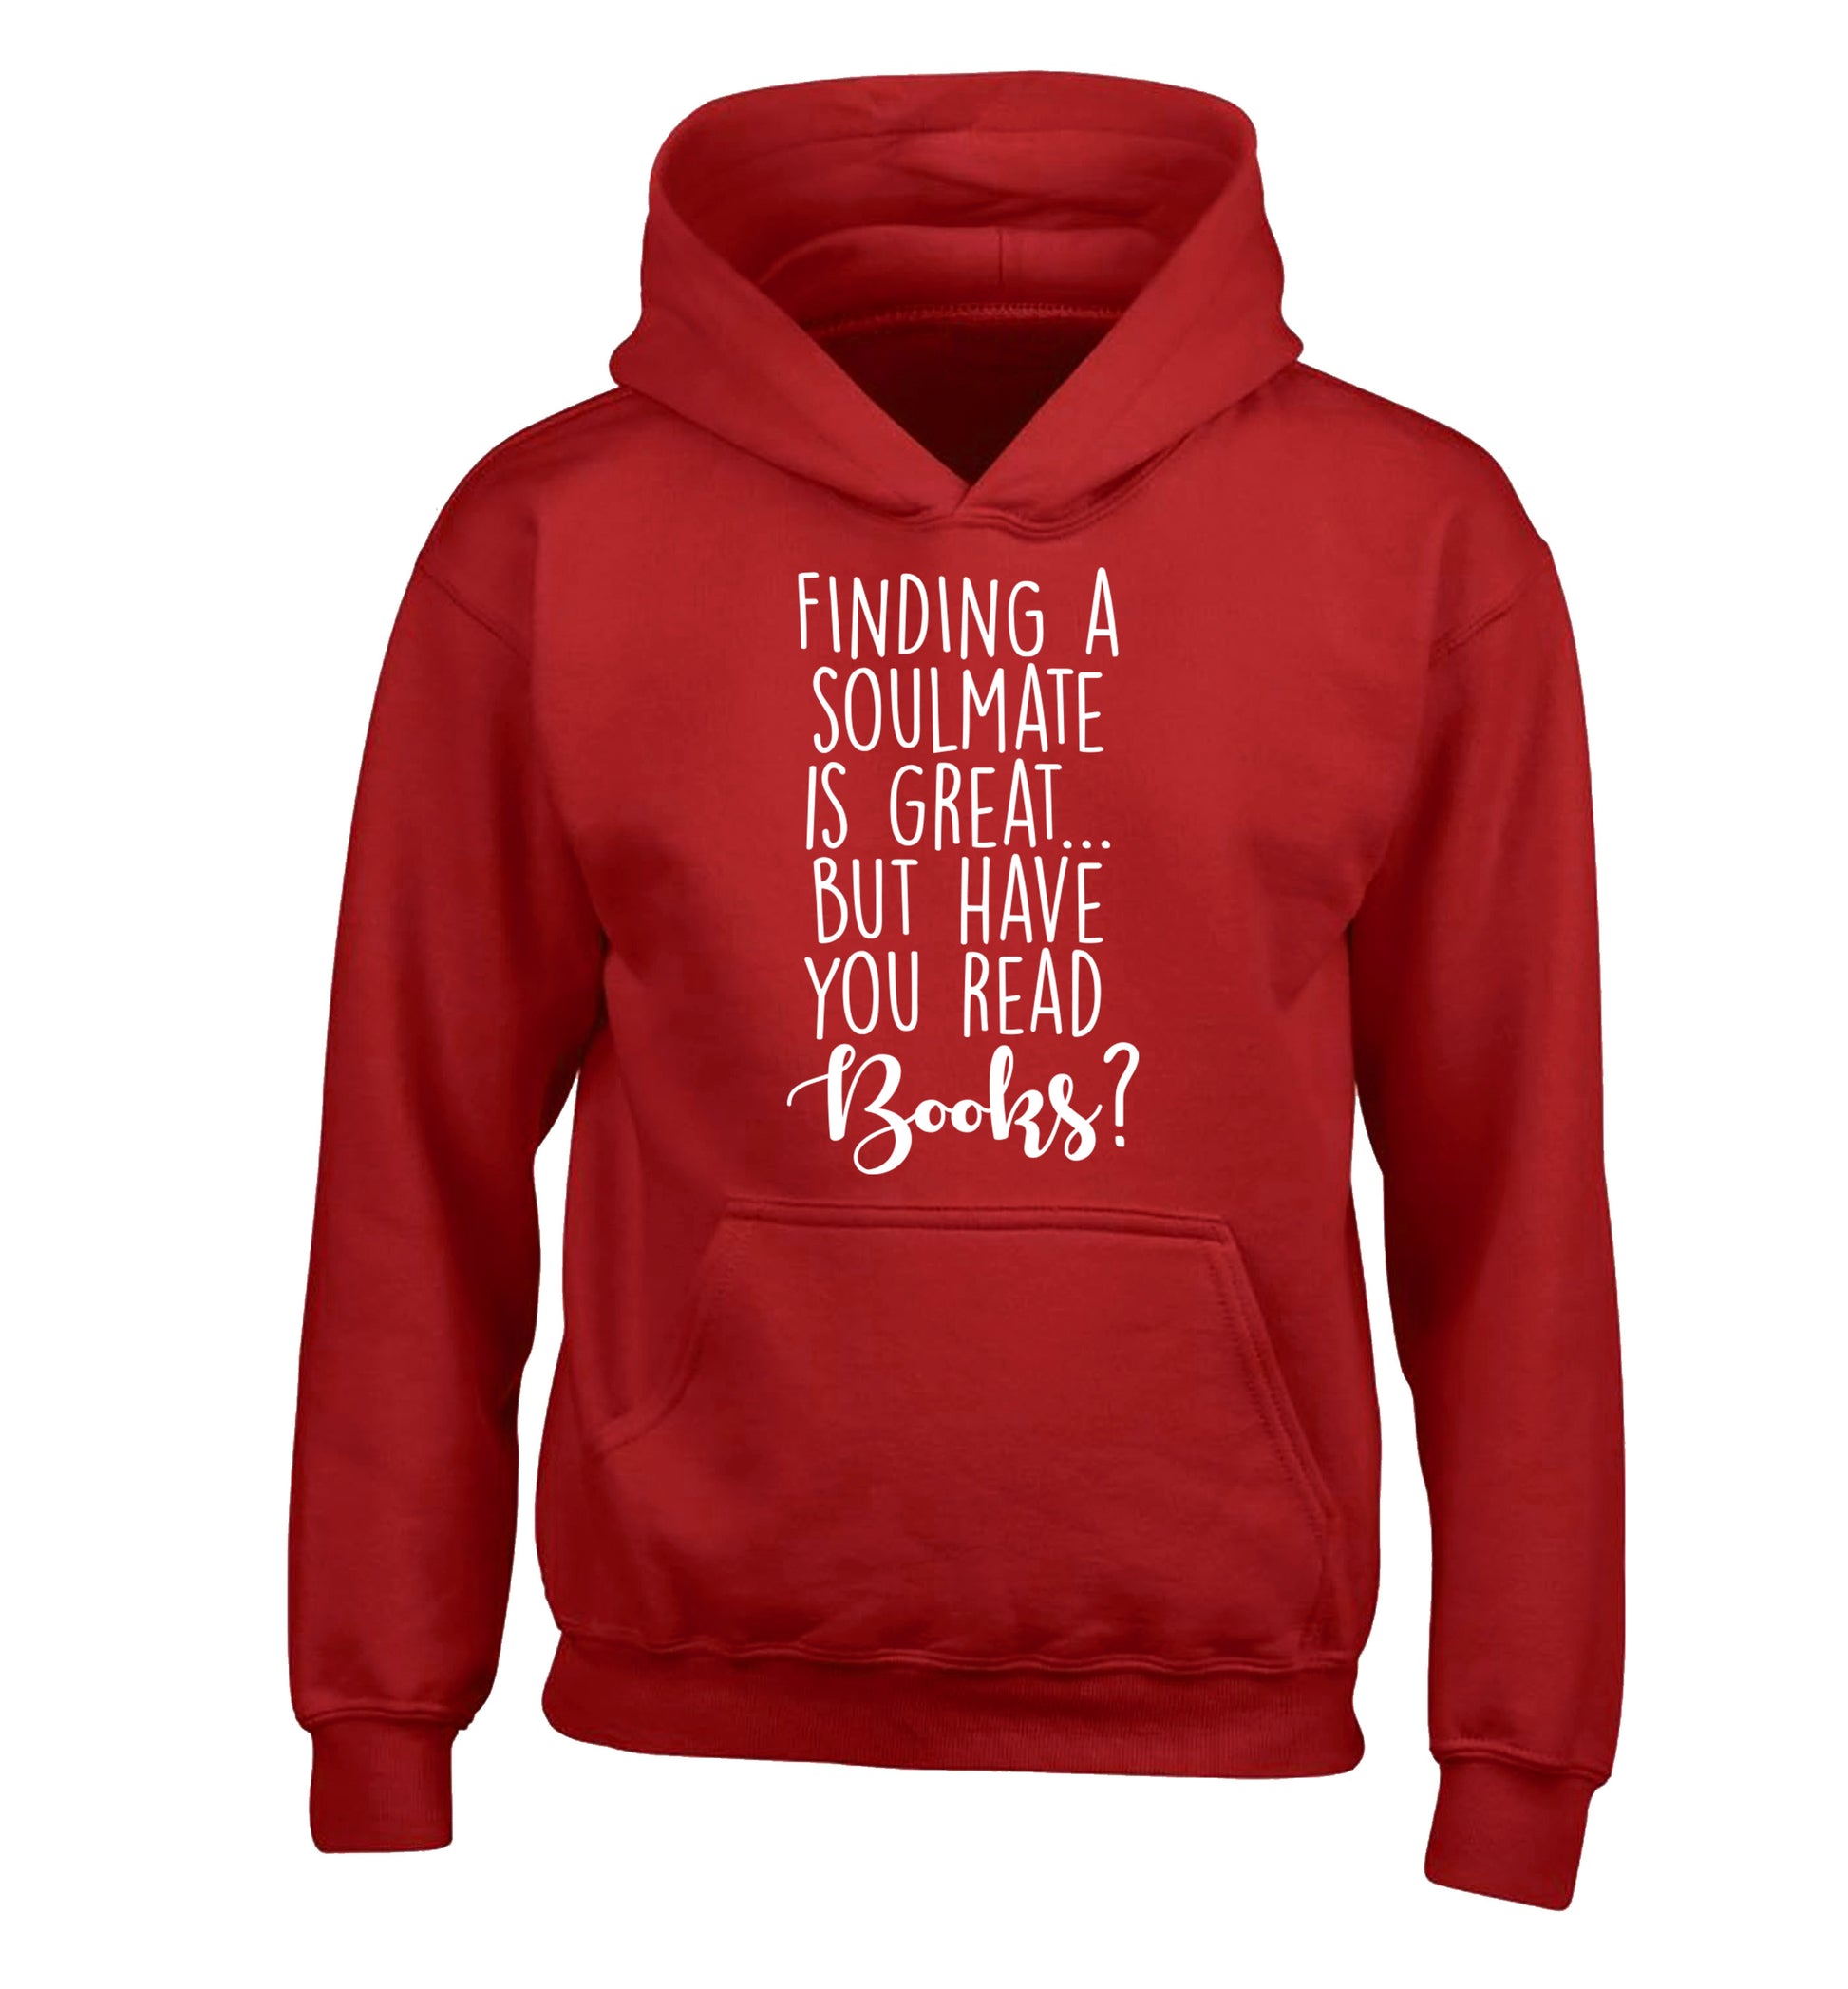 Finding a soulmate is great but have you read books? children's red hoodie 12-13 Years